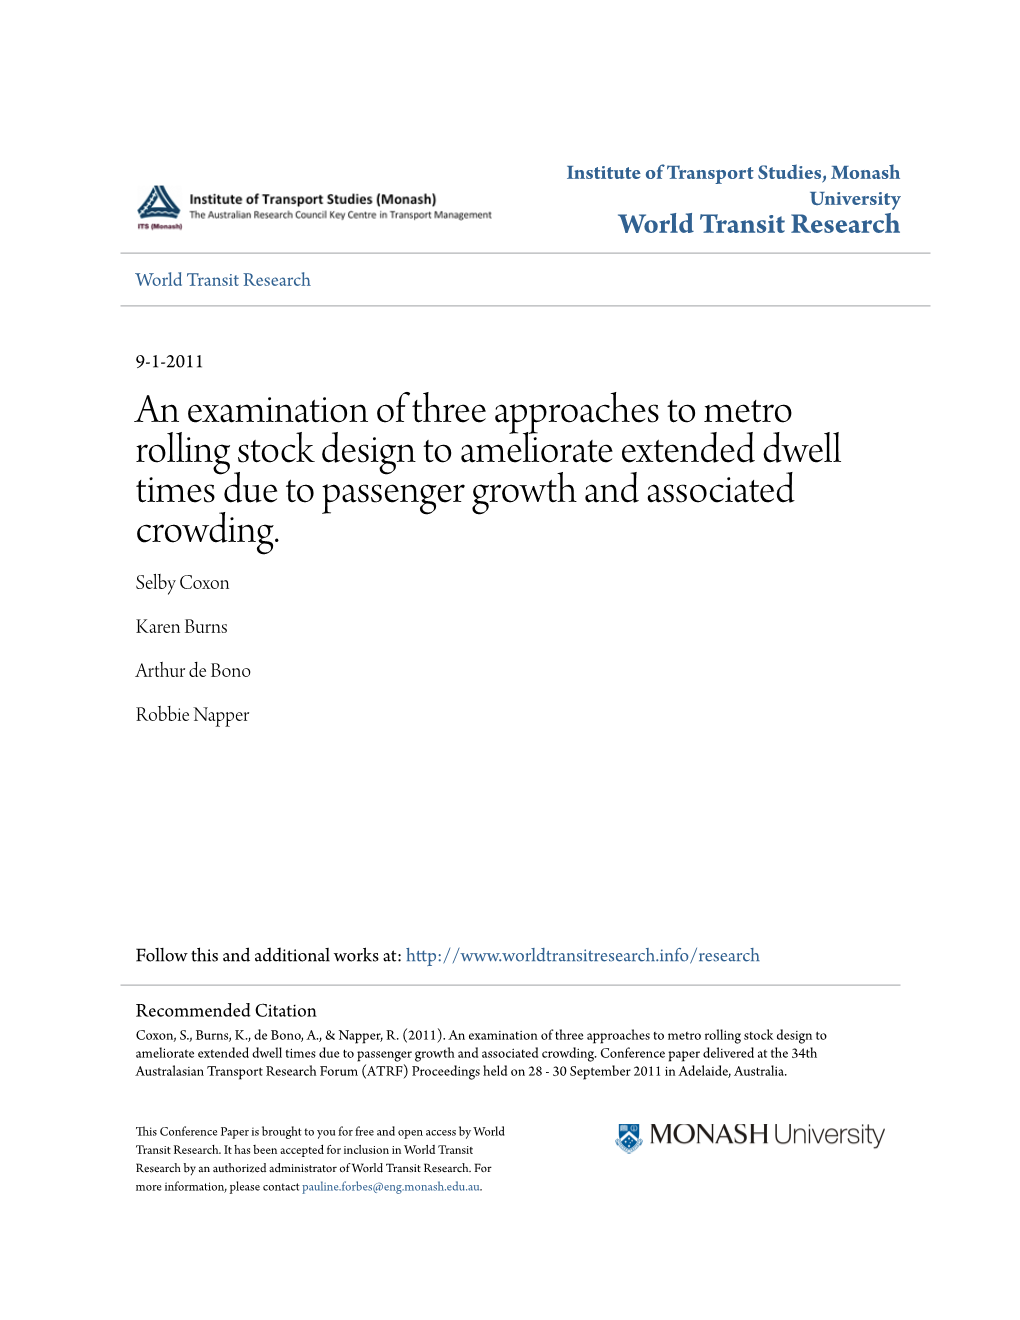 An Examination of Three Approaches to Metro Rolling Stock Design to Ameliorate Extended Dwell Times Due to Passenger Growth and Associated Crowding